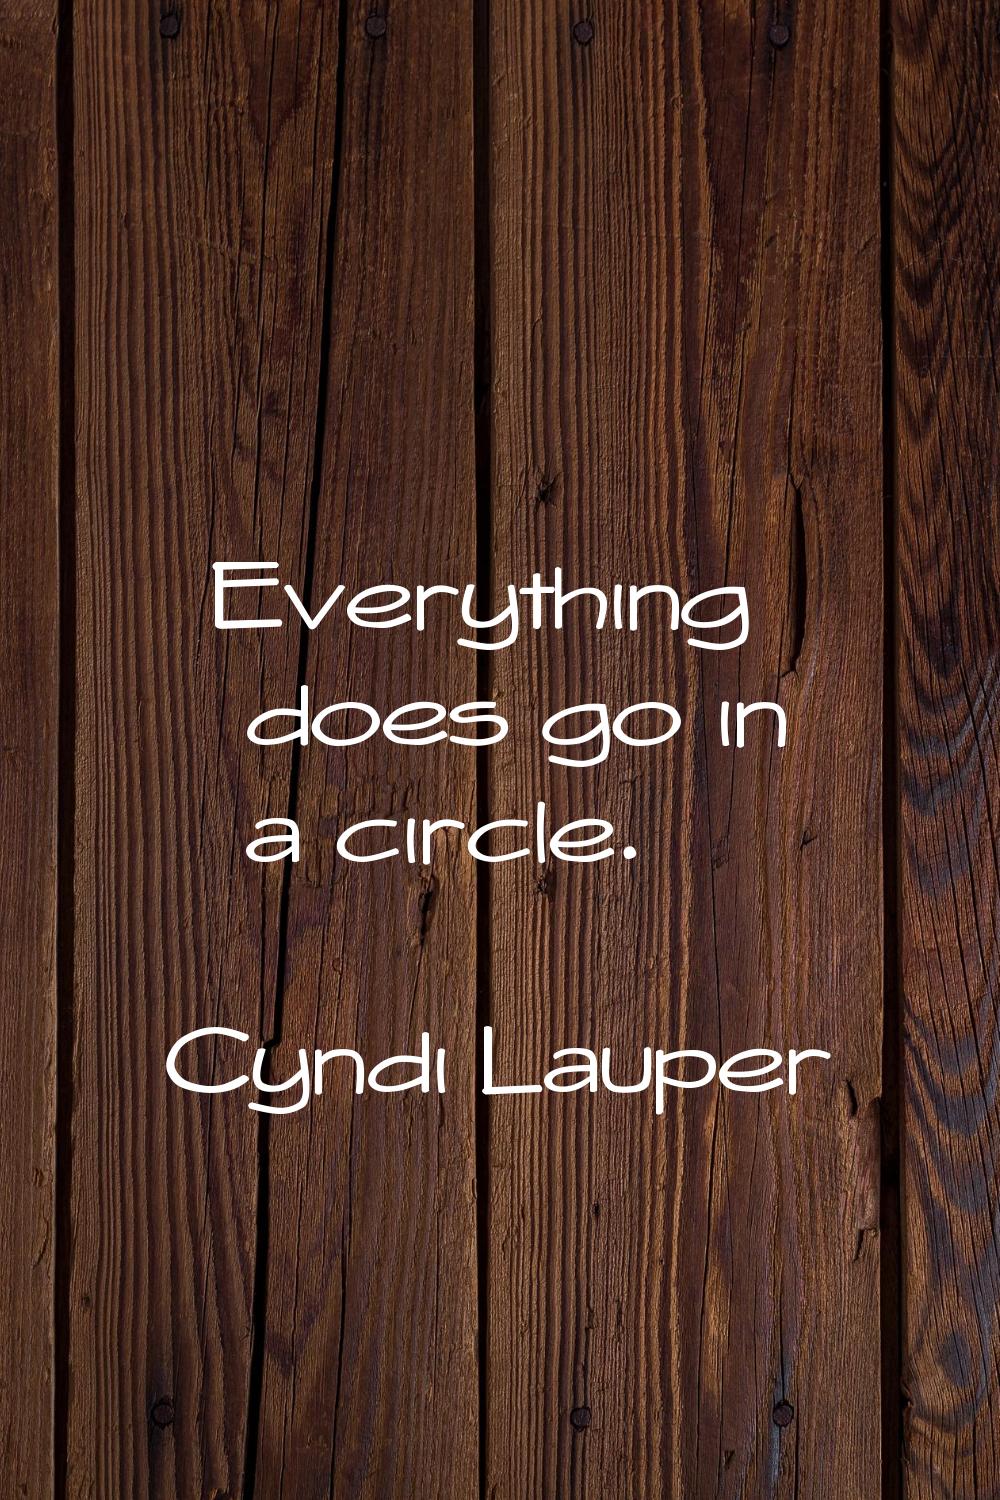 Everything does go in a circle.